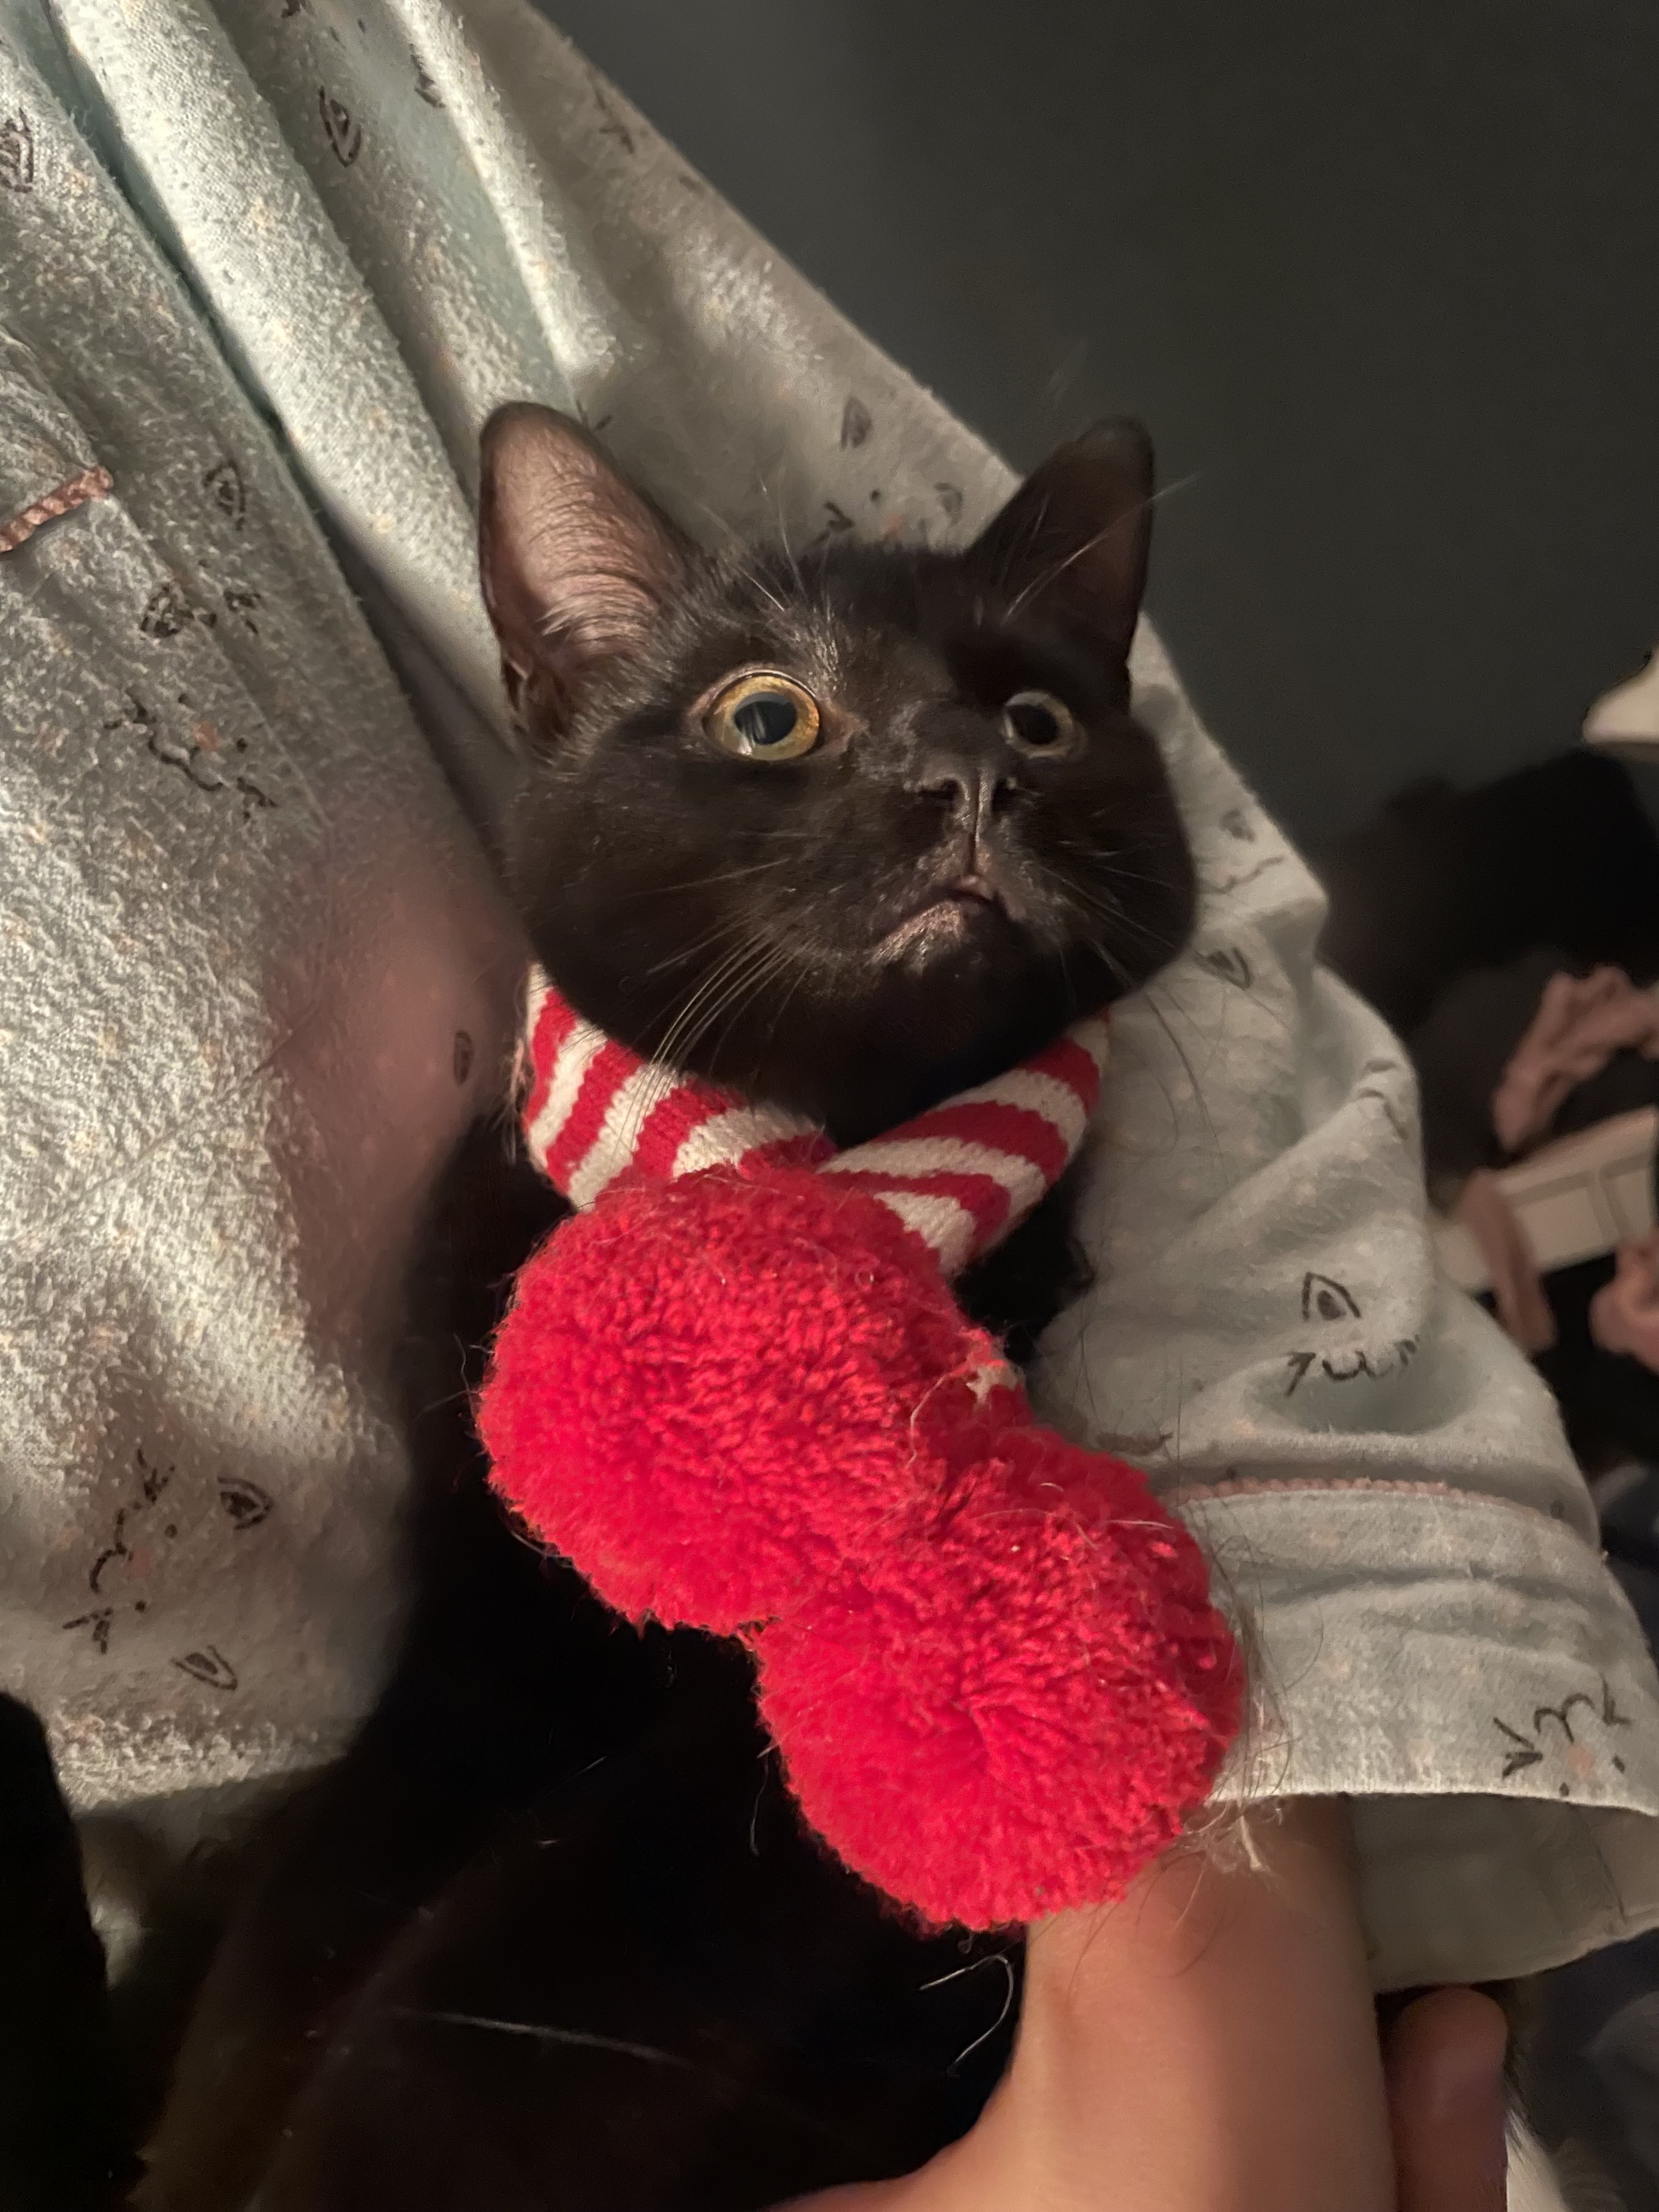 A black cat wearing a red and white scarf with red pom-poms, being held in arms like a baby, and looking very silly. 